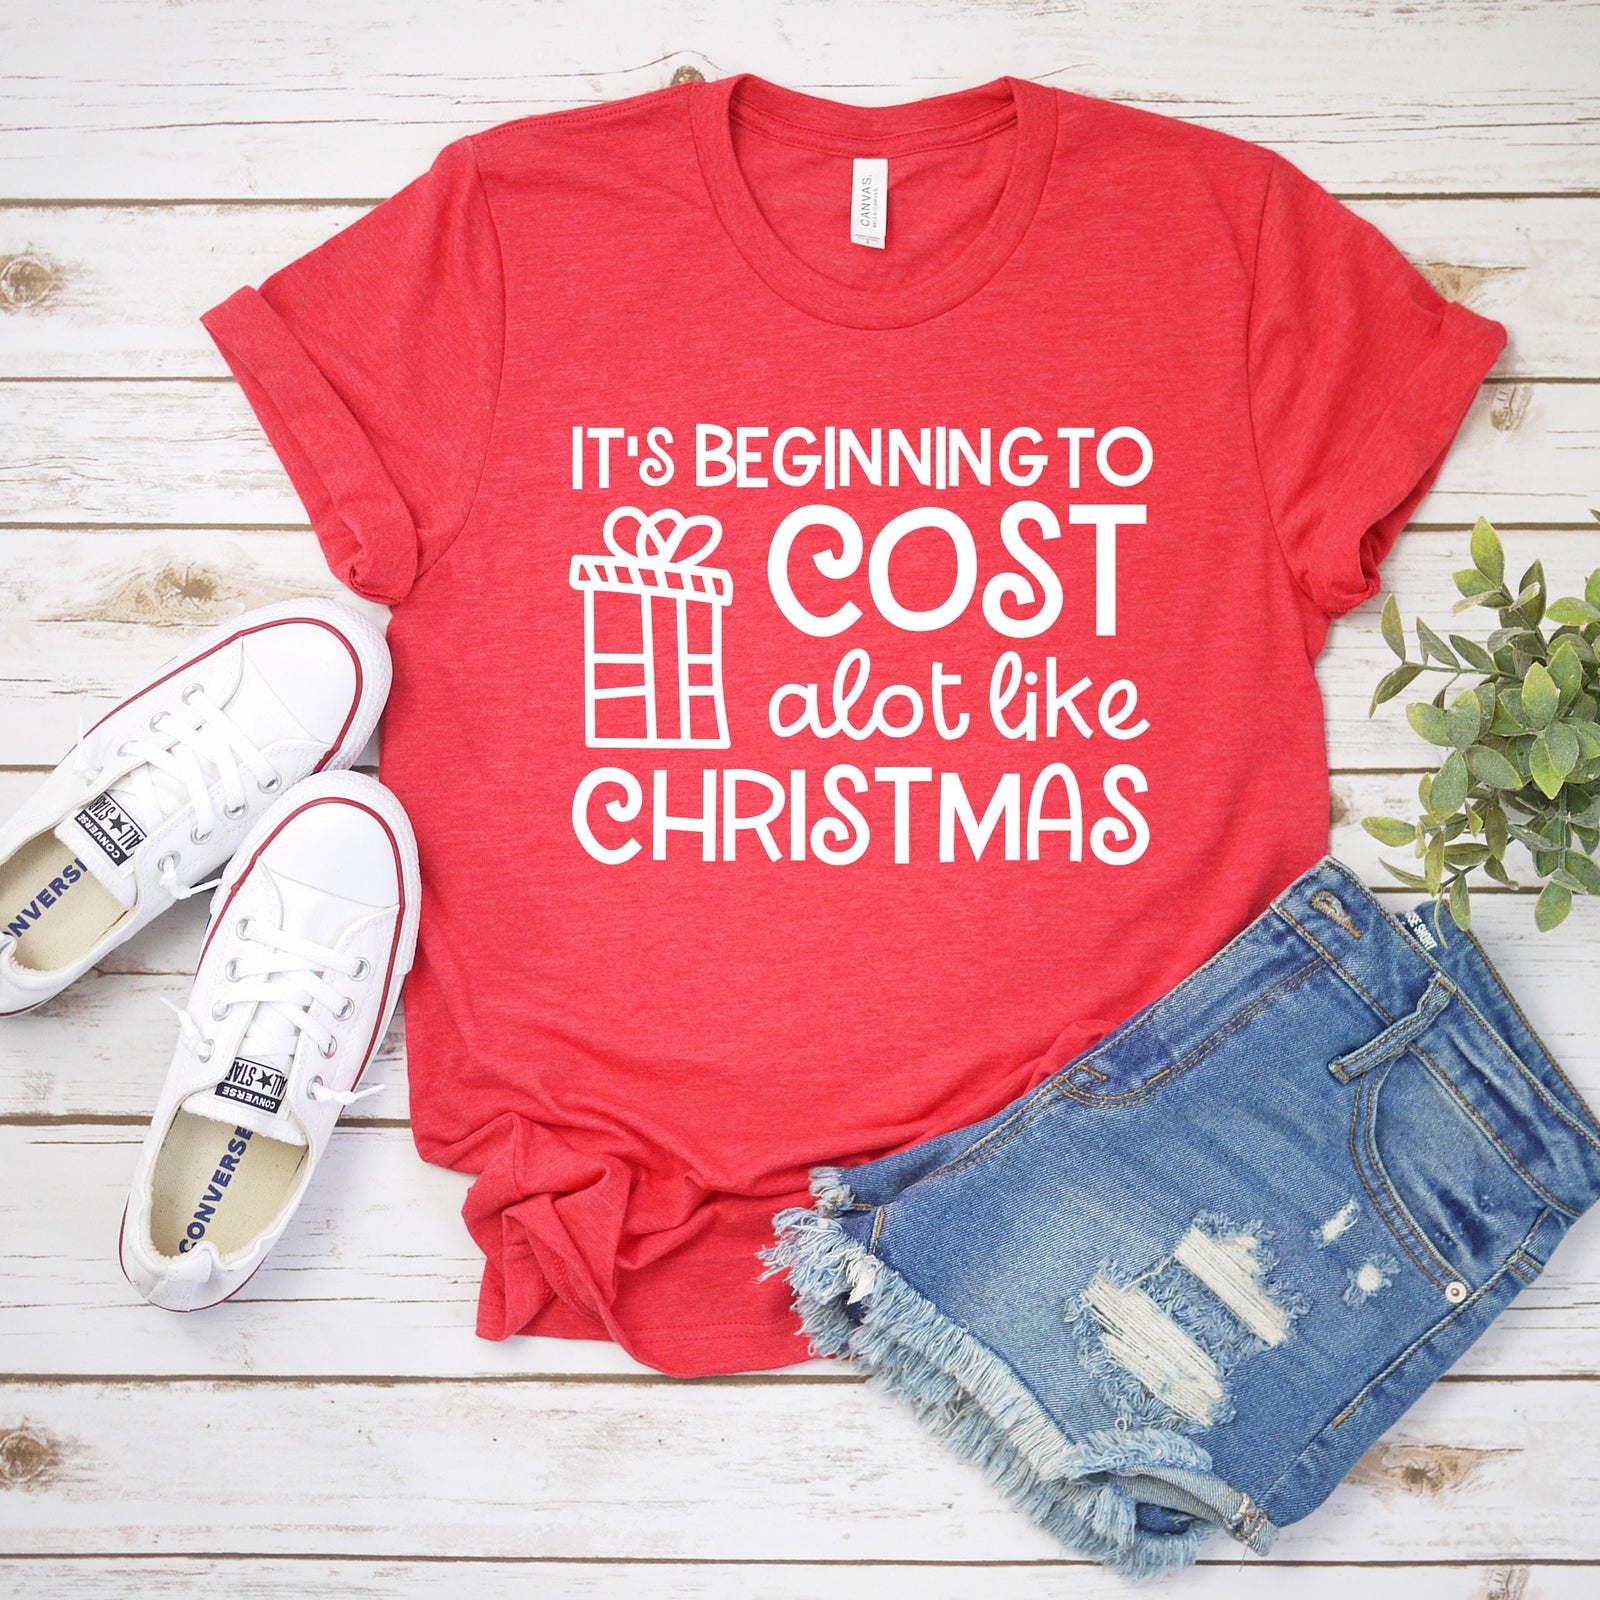 It's Beginning to Cost A lot like Christmas T Shirt - Funny Christmas T Shirt- Christmas Statement Shirt - Christmas Santa Shirt